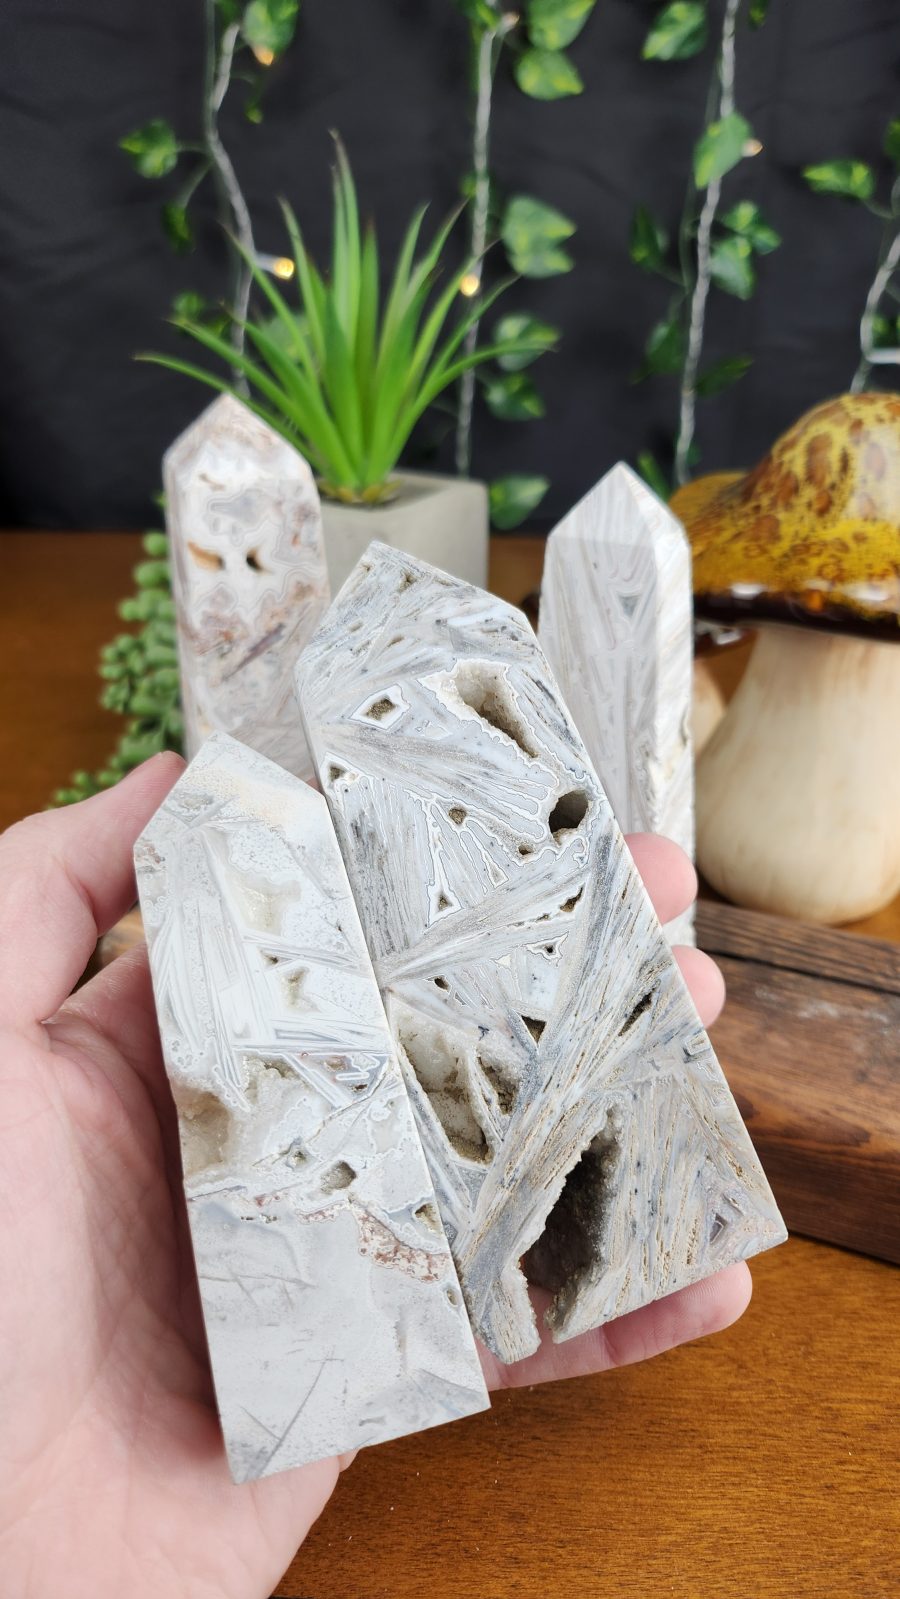 White Lace Agate Large Crystal Towers shown in hand for scale.